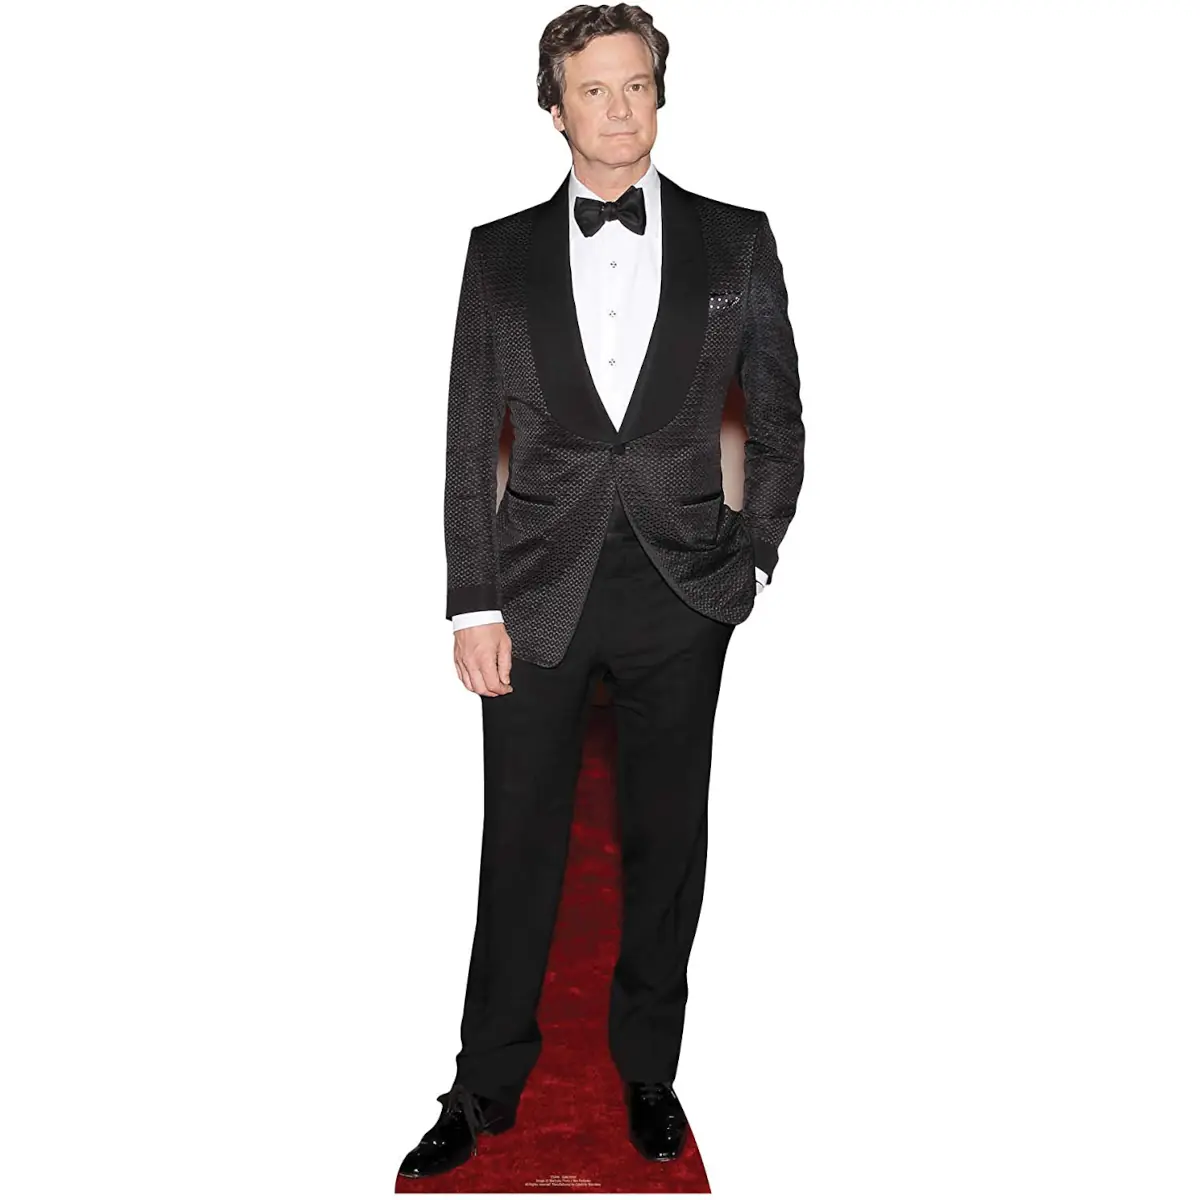 CS444 Colin Firth Black Suit English Actor Lifesize Cardboard Cutout Standee